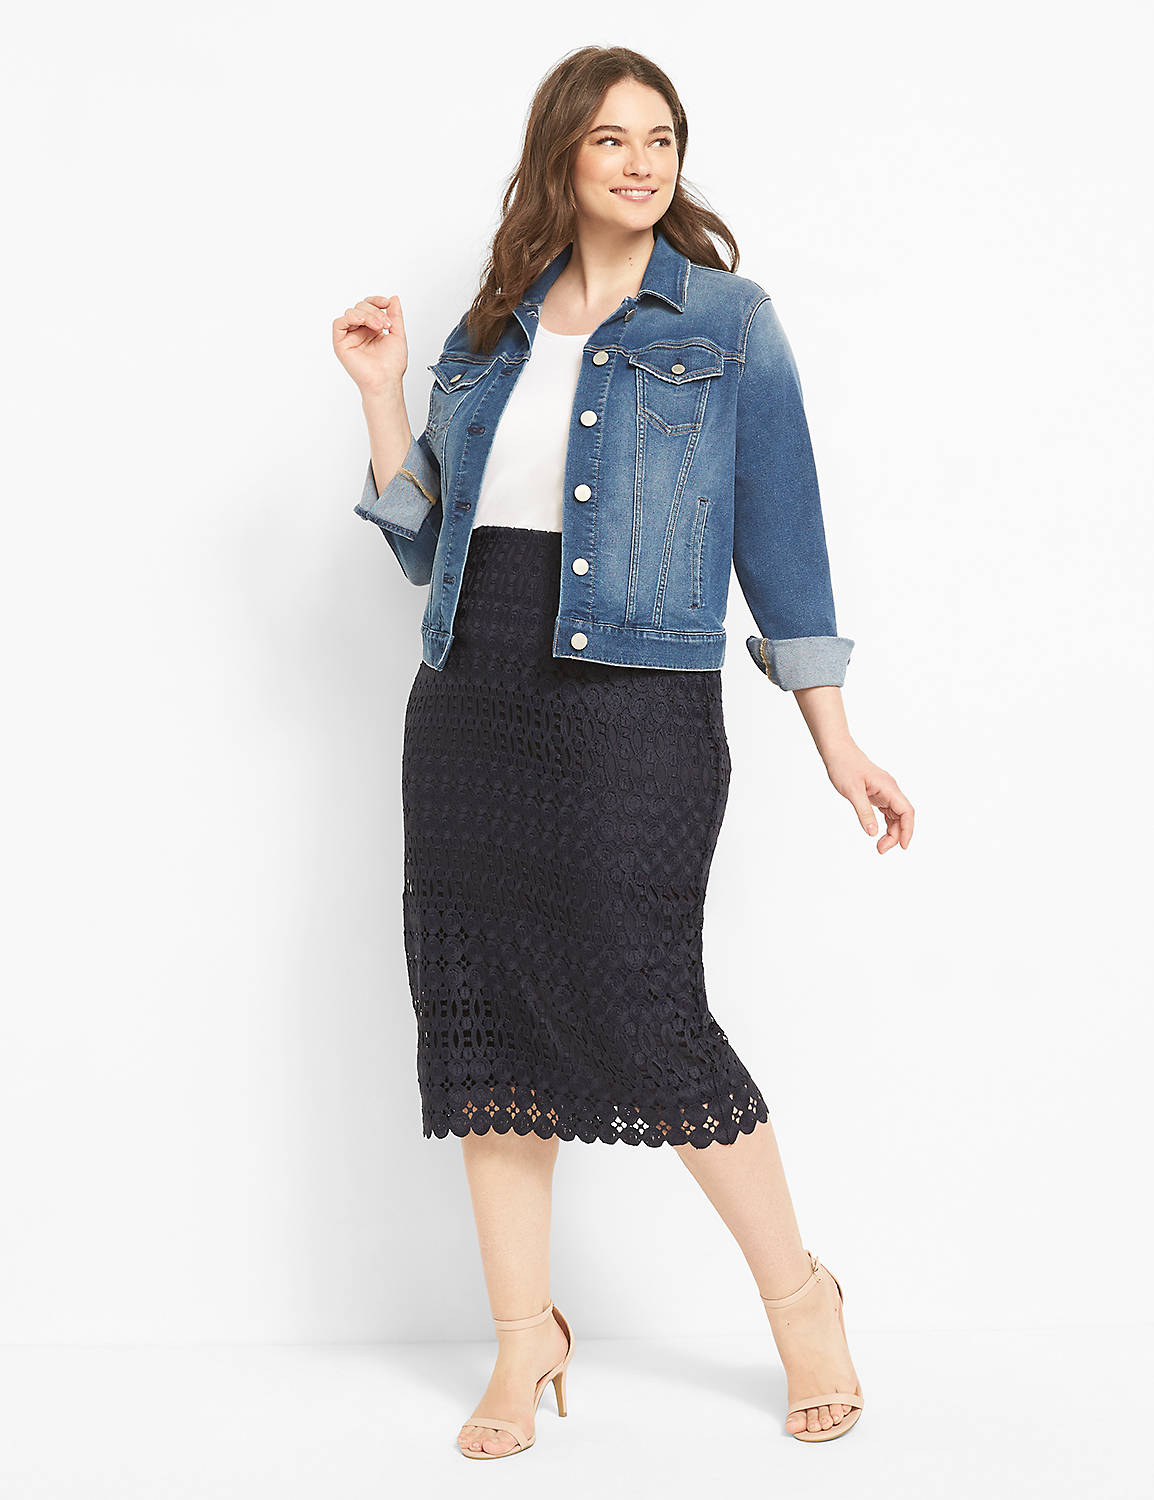 Lace Pencil Skirt 1127712 Product Image 3